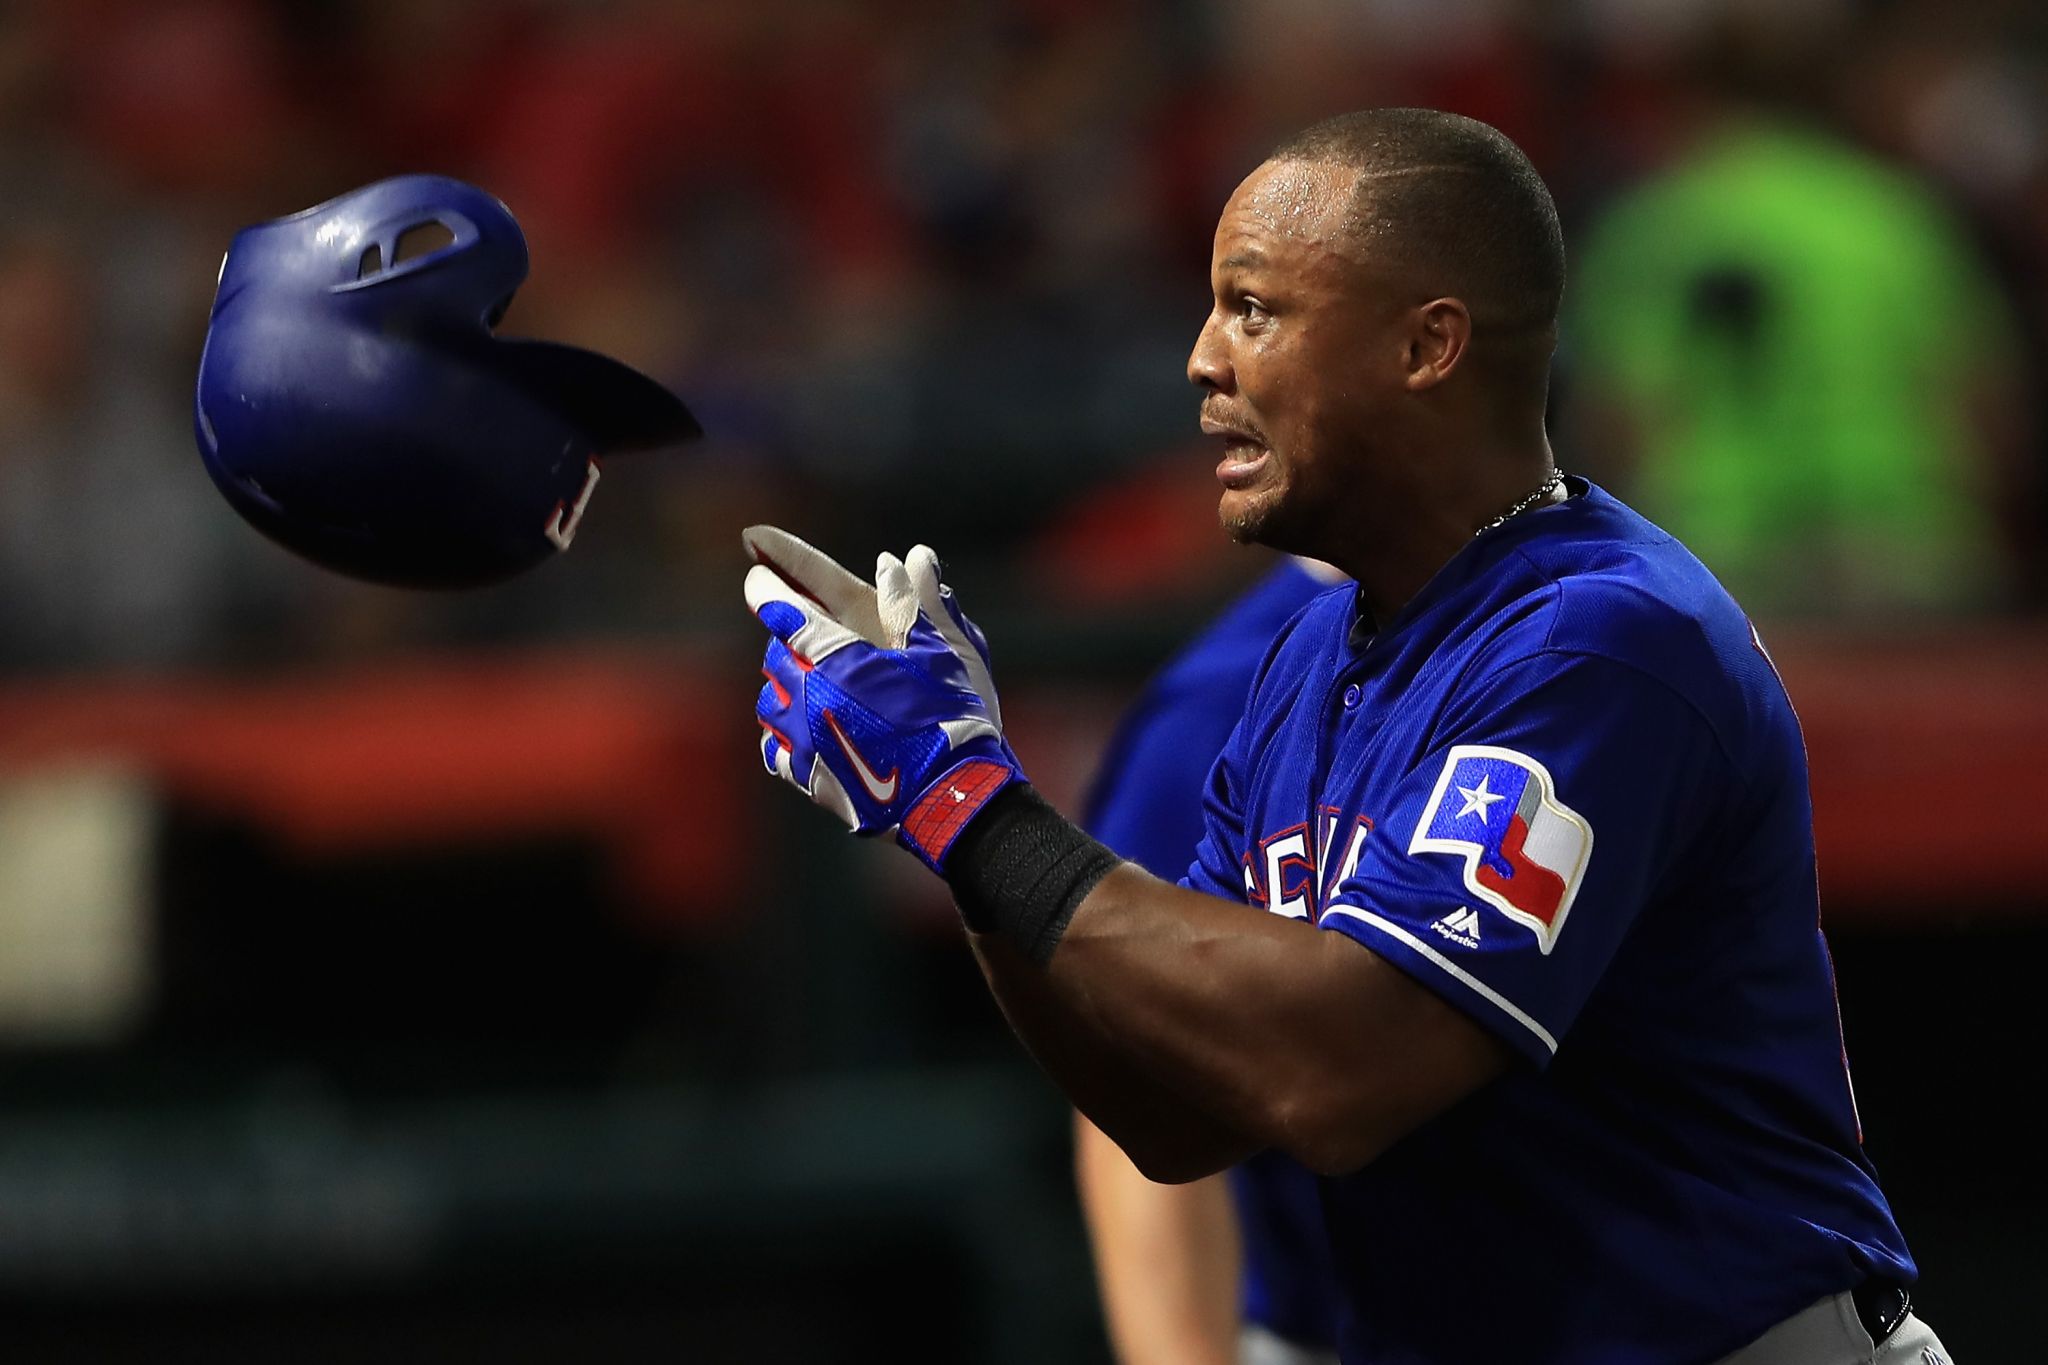 Texas Rangers: Petition calls for removal of state flag from jerseys